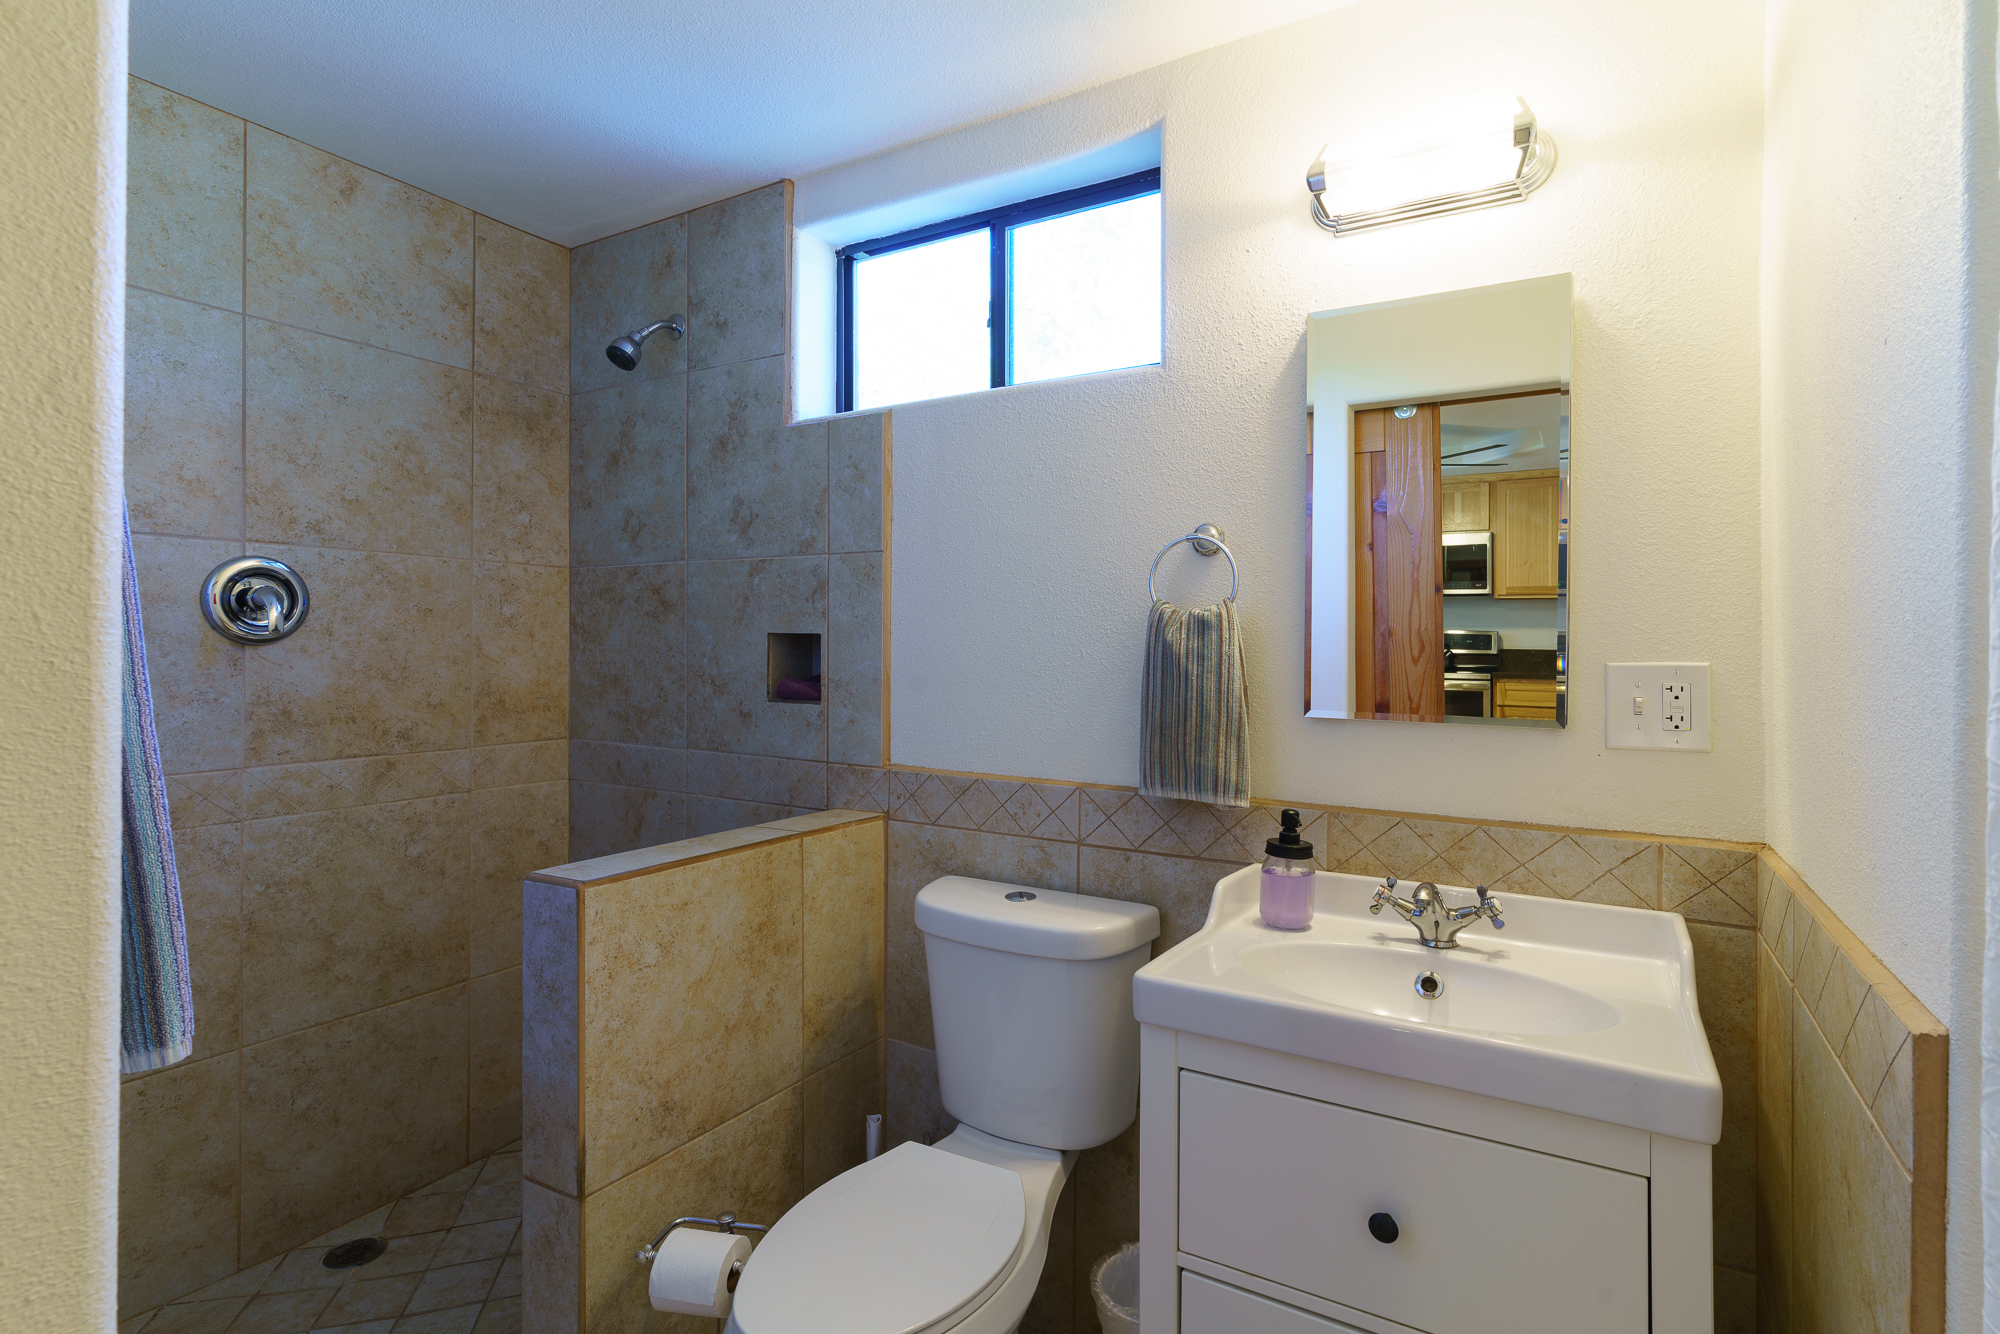 Bathroom with partially tile walls containing a small sink, toilet with push to flush buttons, and an open shower big enough to maneuver in.